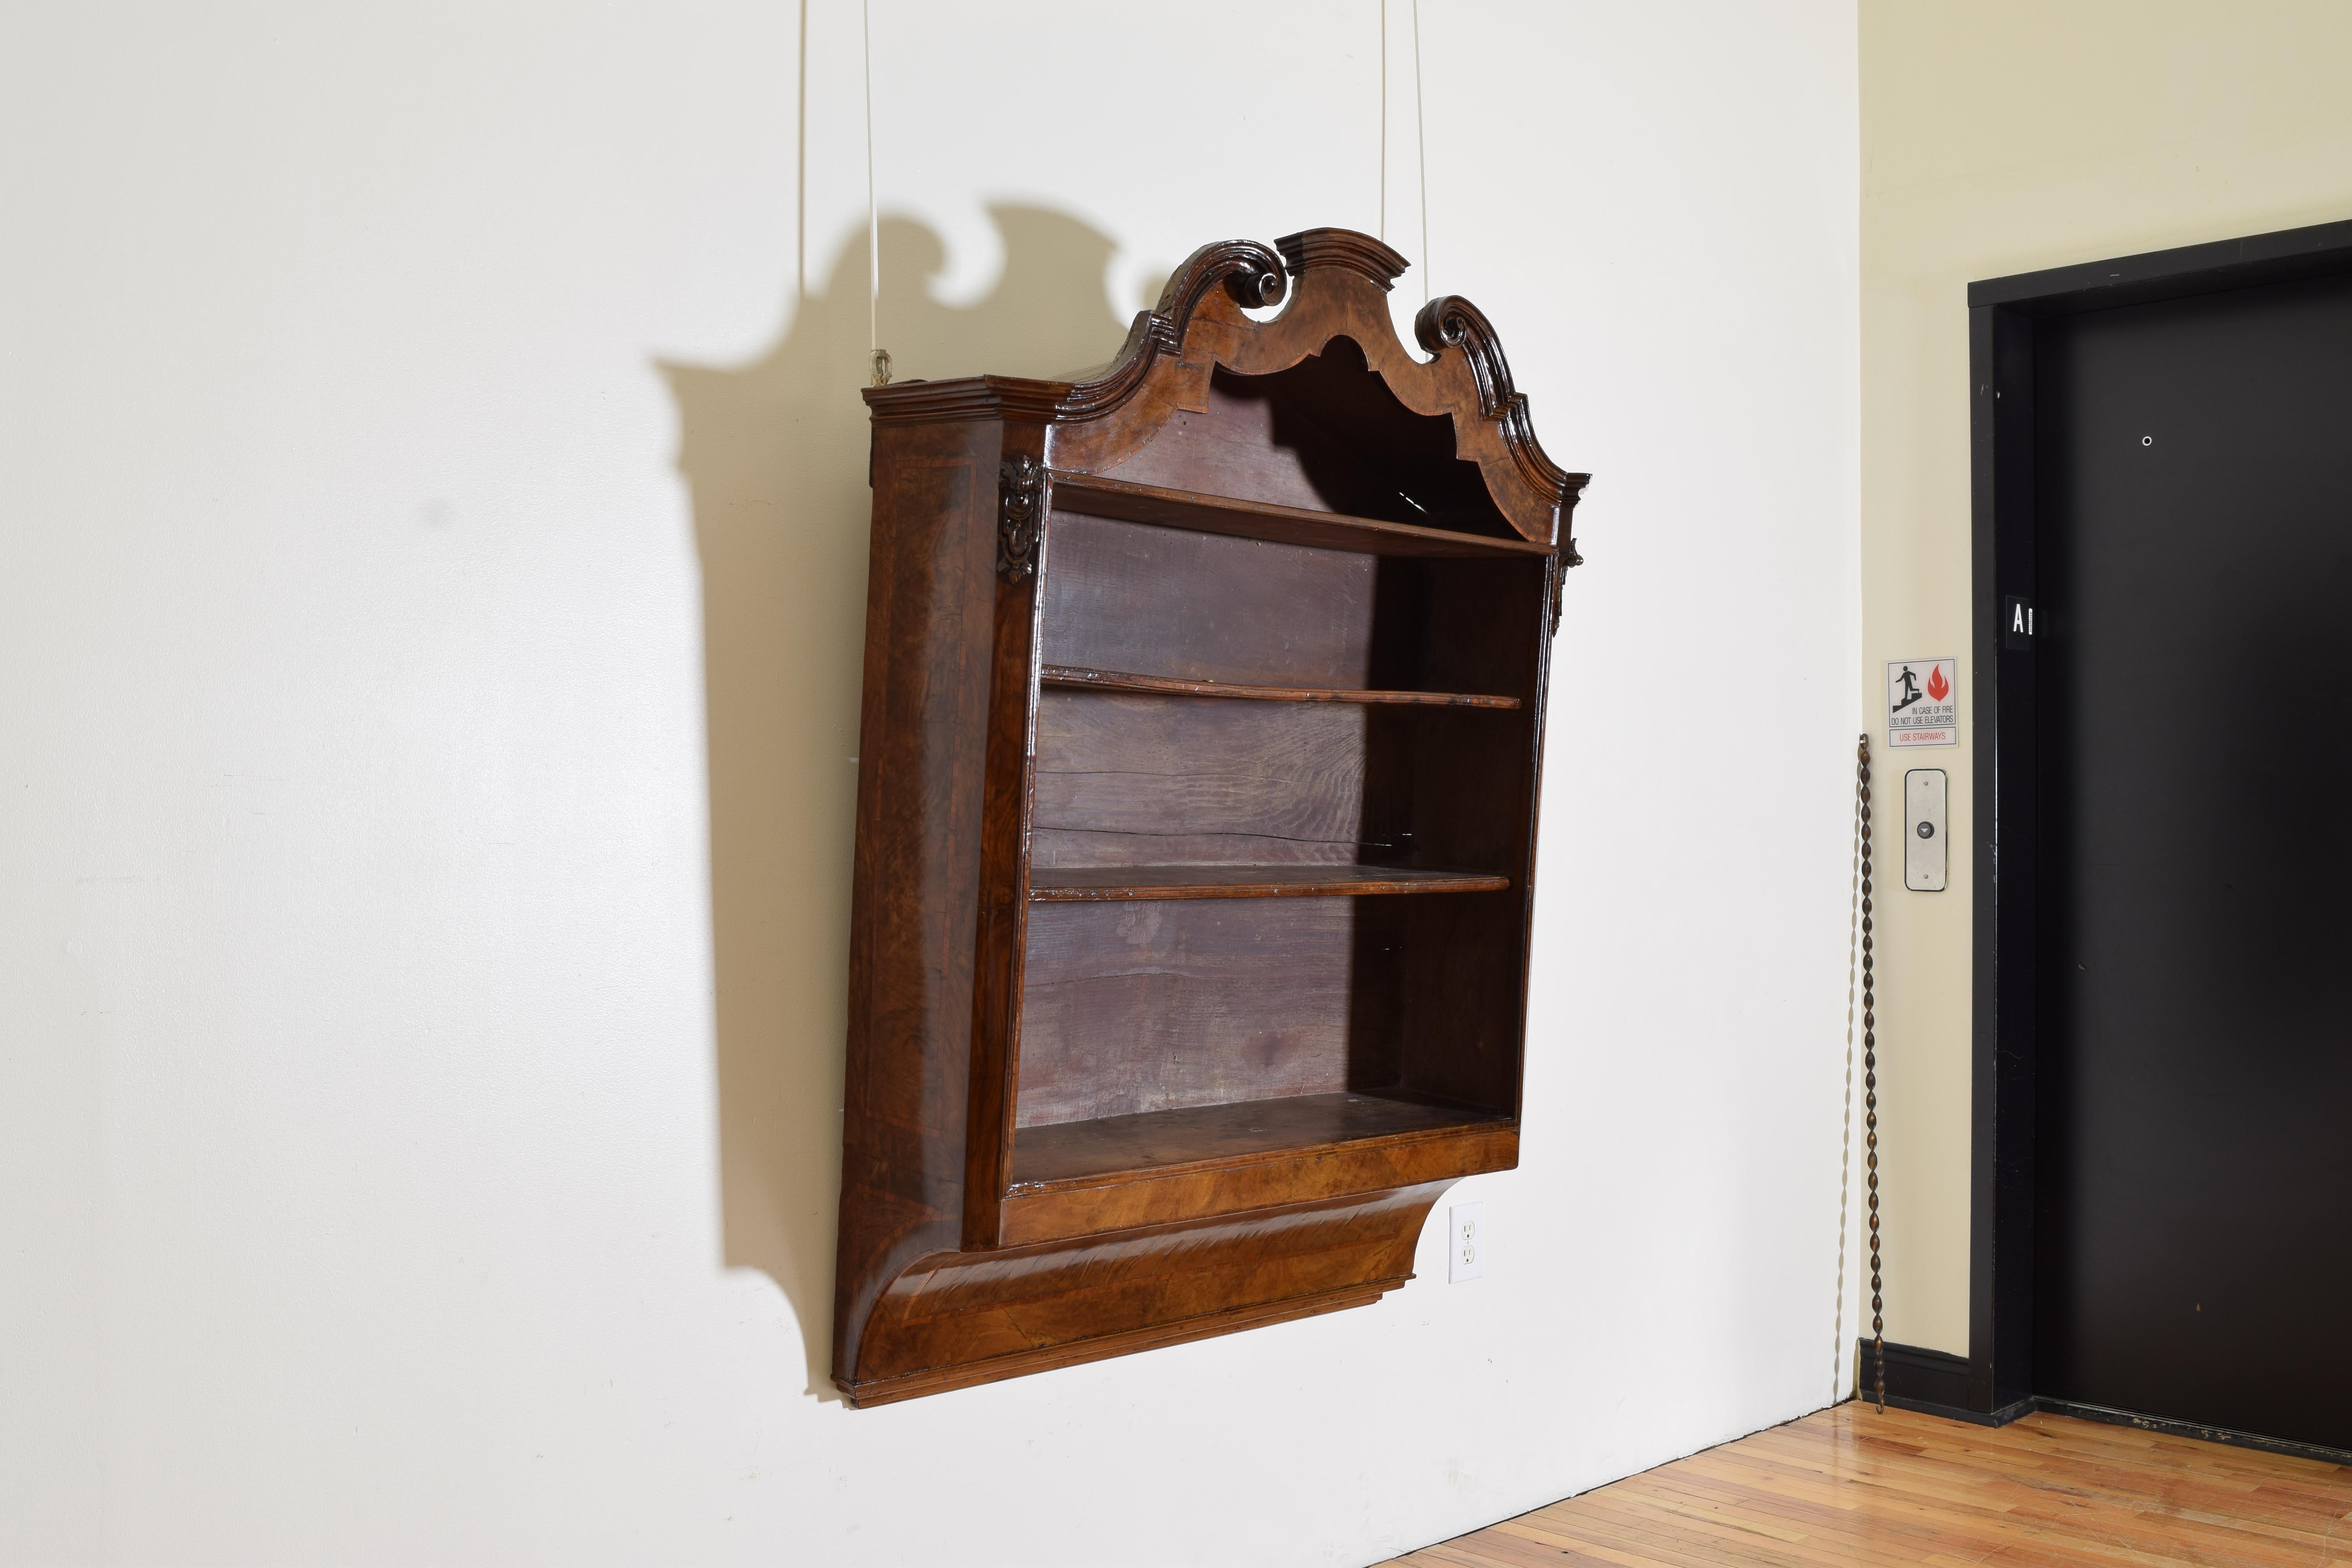 Having a shaped and carved pediment in the early Georgian style this Italian hanging wall shelf has four levels with beautifully figured walnut veneers, the bottom is curved inward and ends in stepped moldings